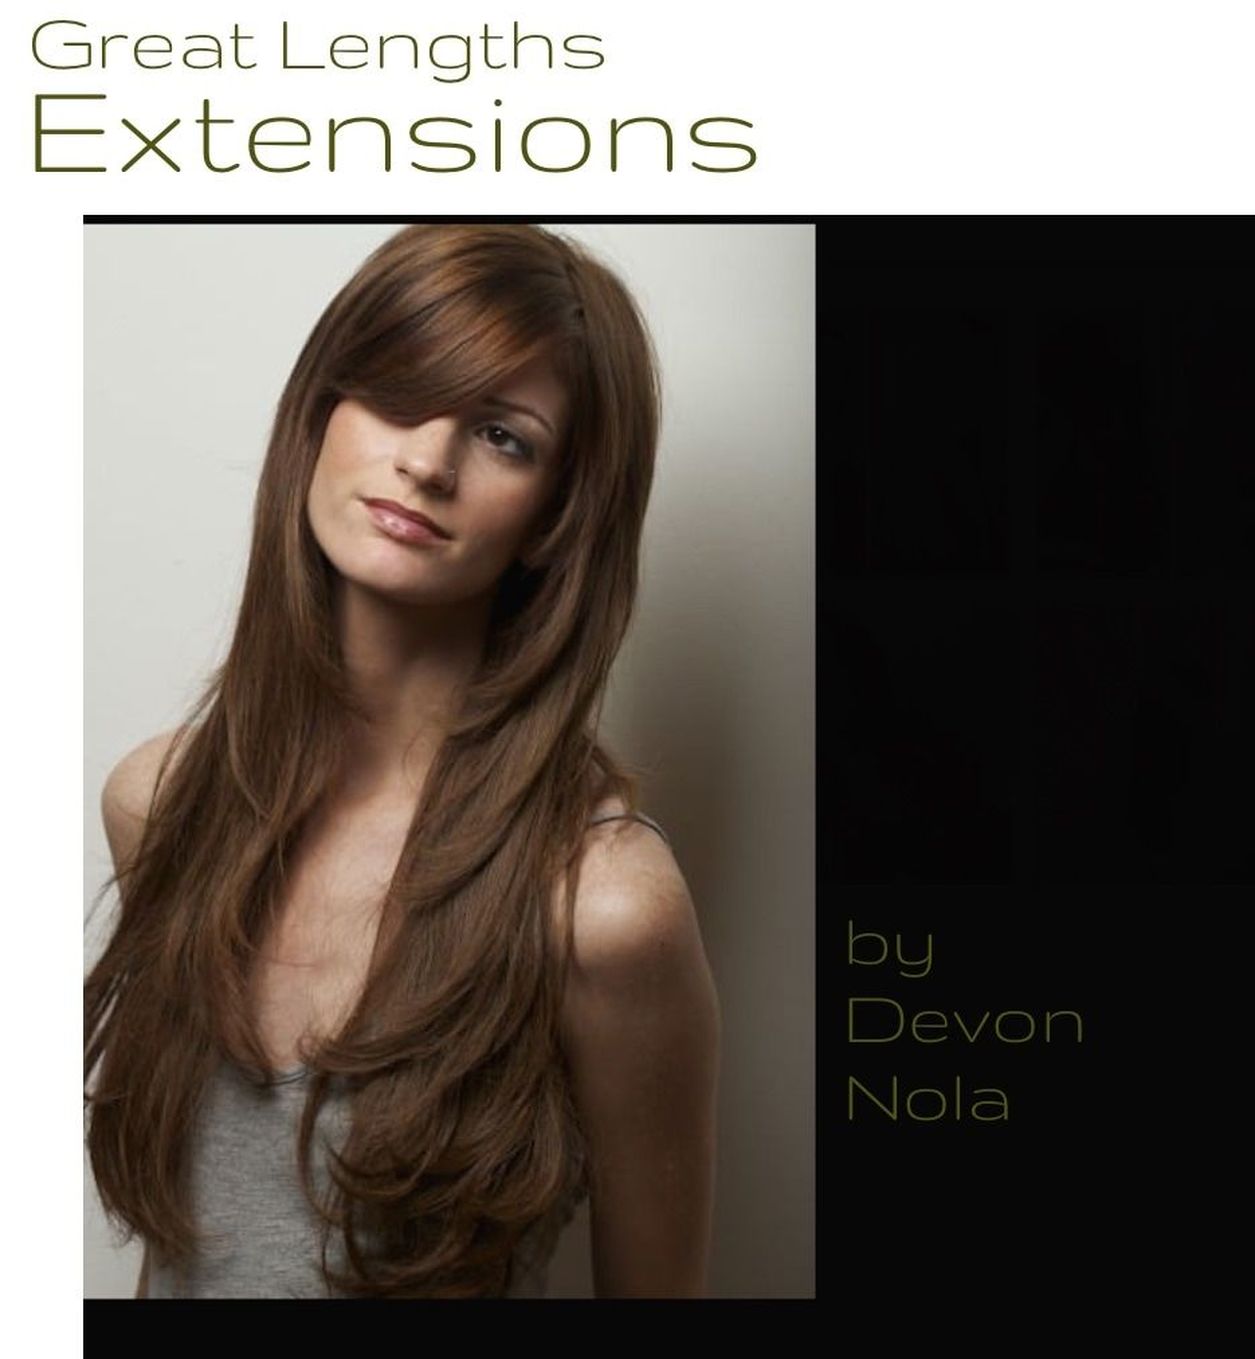 In NYC Great Lengths Hair Extension Specialist Devon Nola Uses The